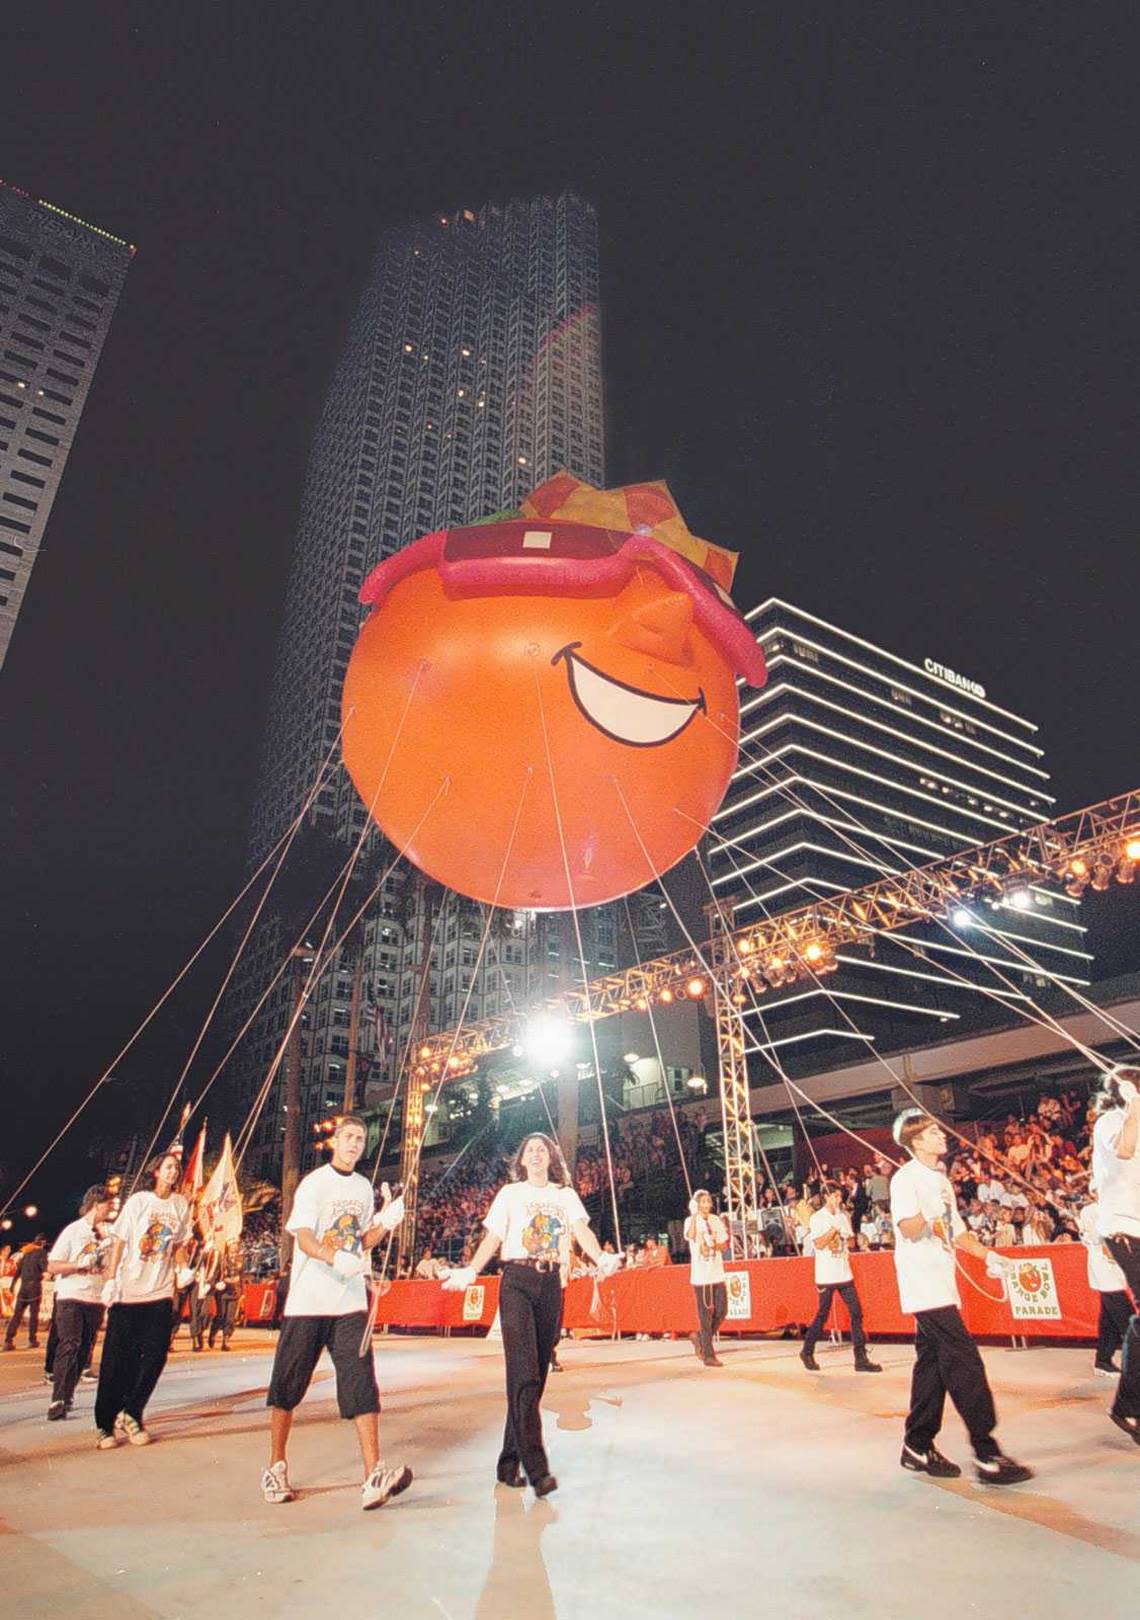 The King Orange balloon makes it way down Biscayne Boulevard in downtown Miami during the annual Orange Bowl Parade.